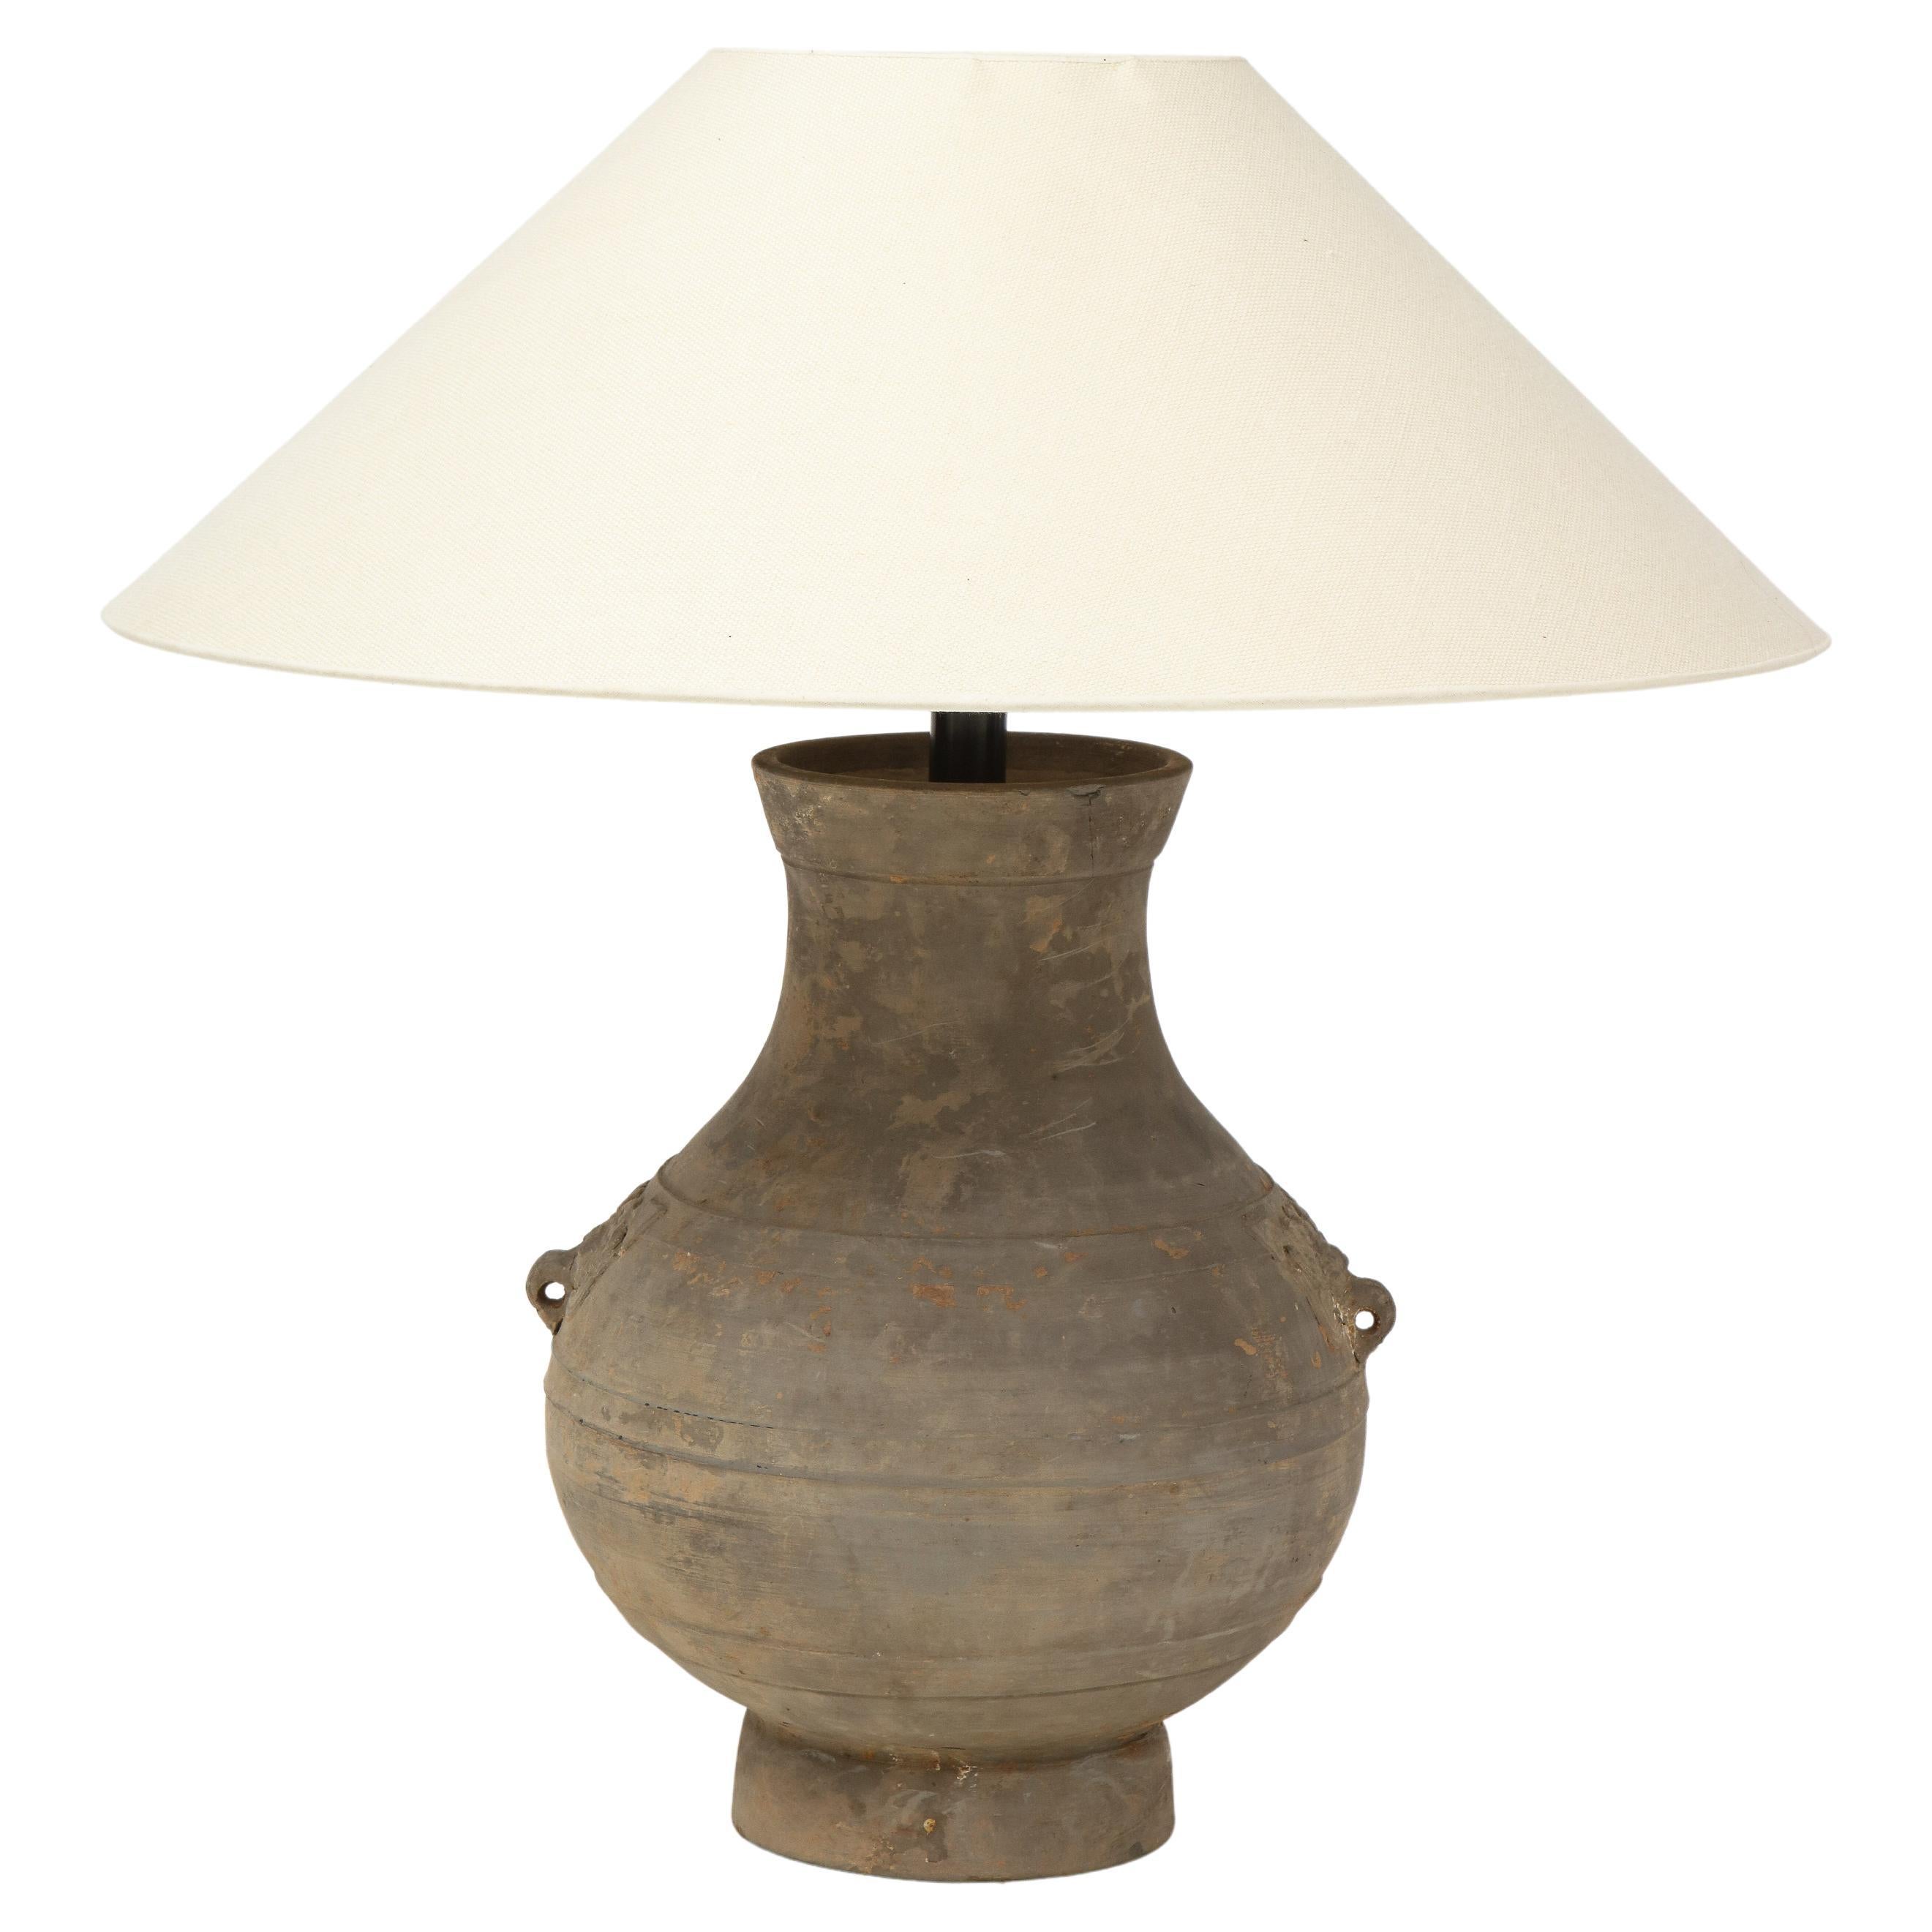 Large 'Han Dynasty’ Vessel Lamp, China with Belgian Linen Shade